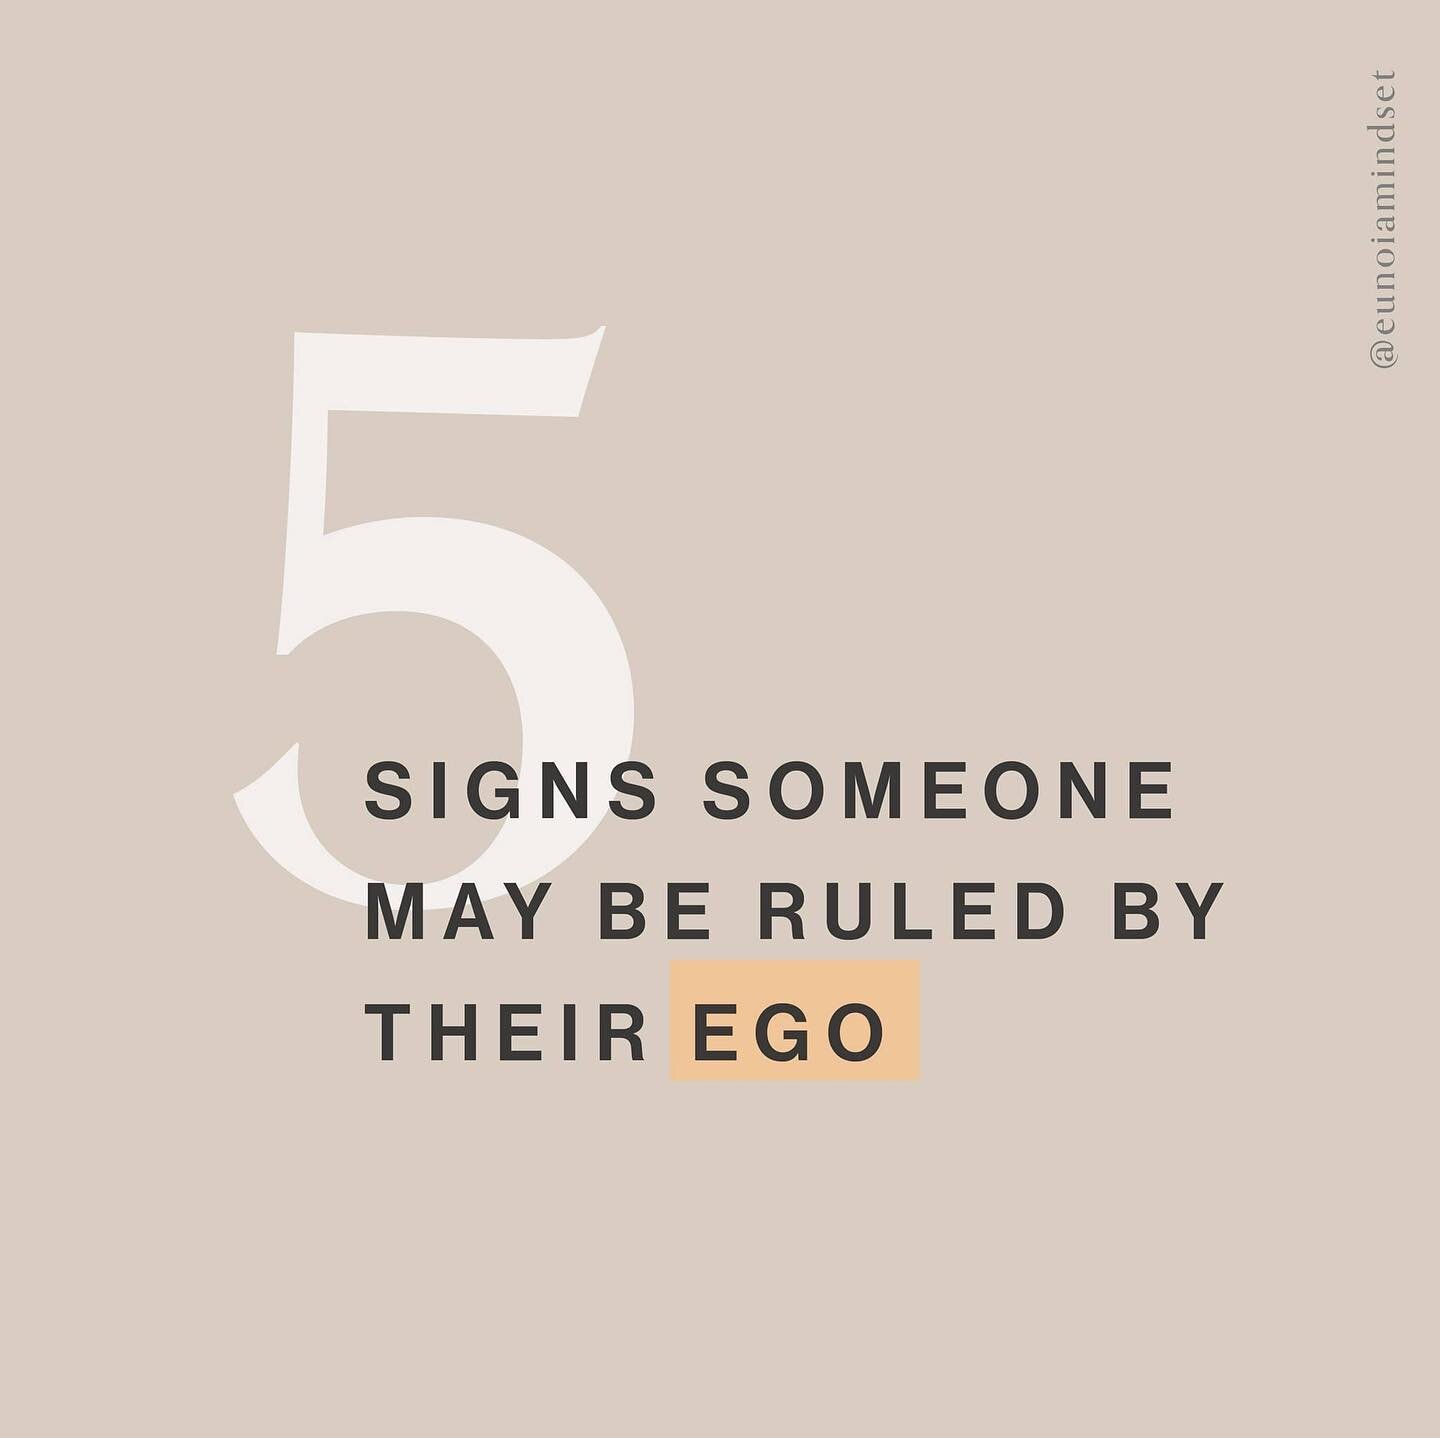 E G O - LAND

When we think back to every argument we ever had, every conflict, there is usually a very clear moment when our ego took over...

When the need to be right, to look good, to not be judged or criticised literally took control of our body